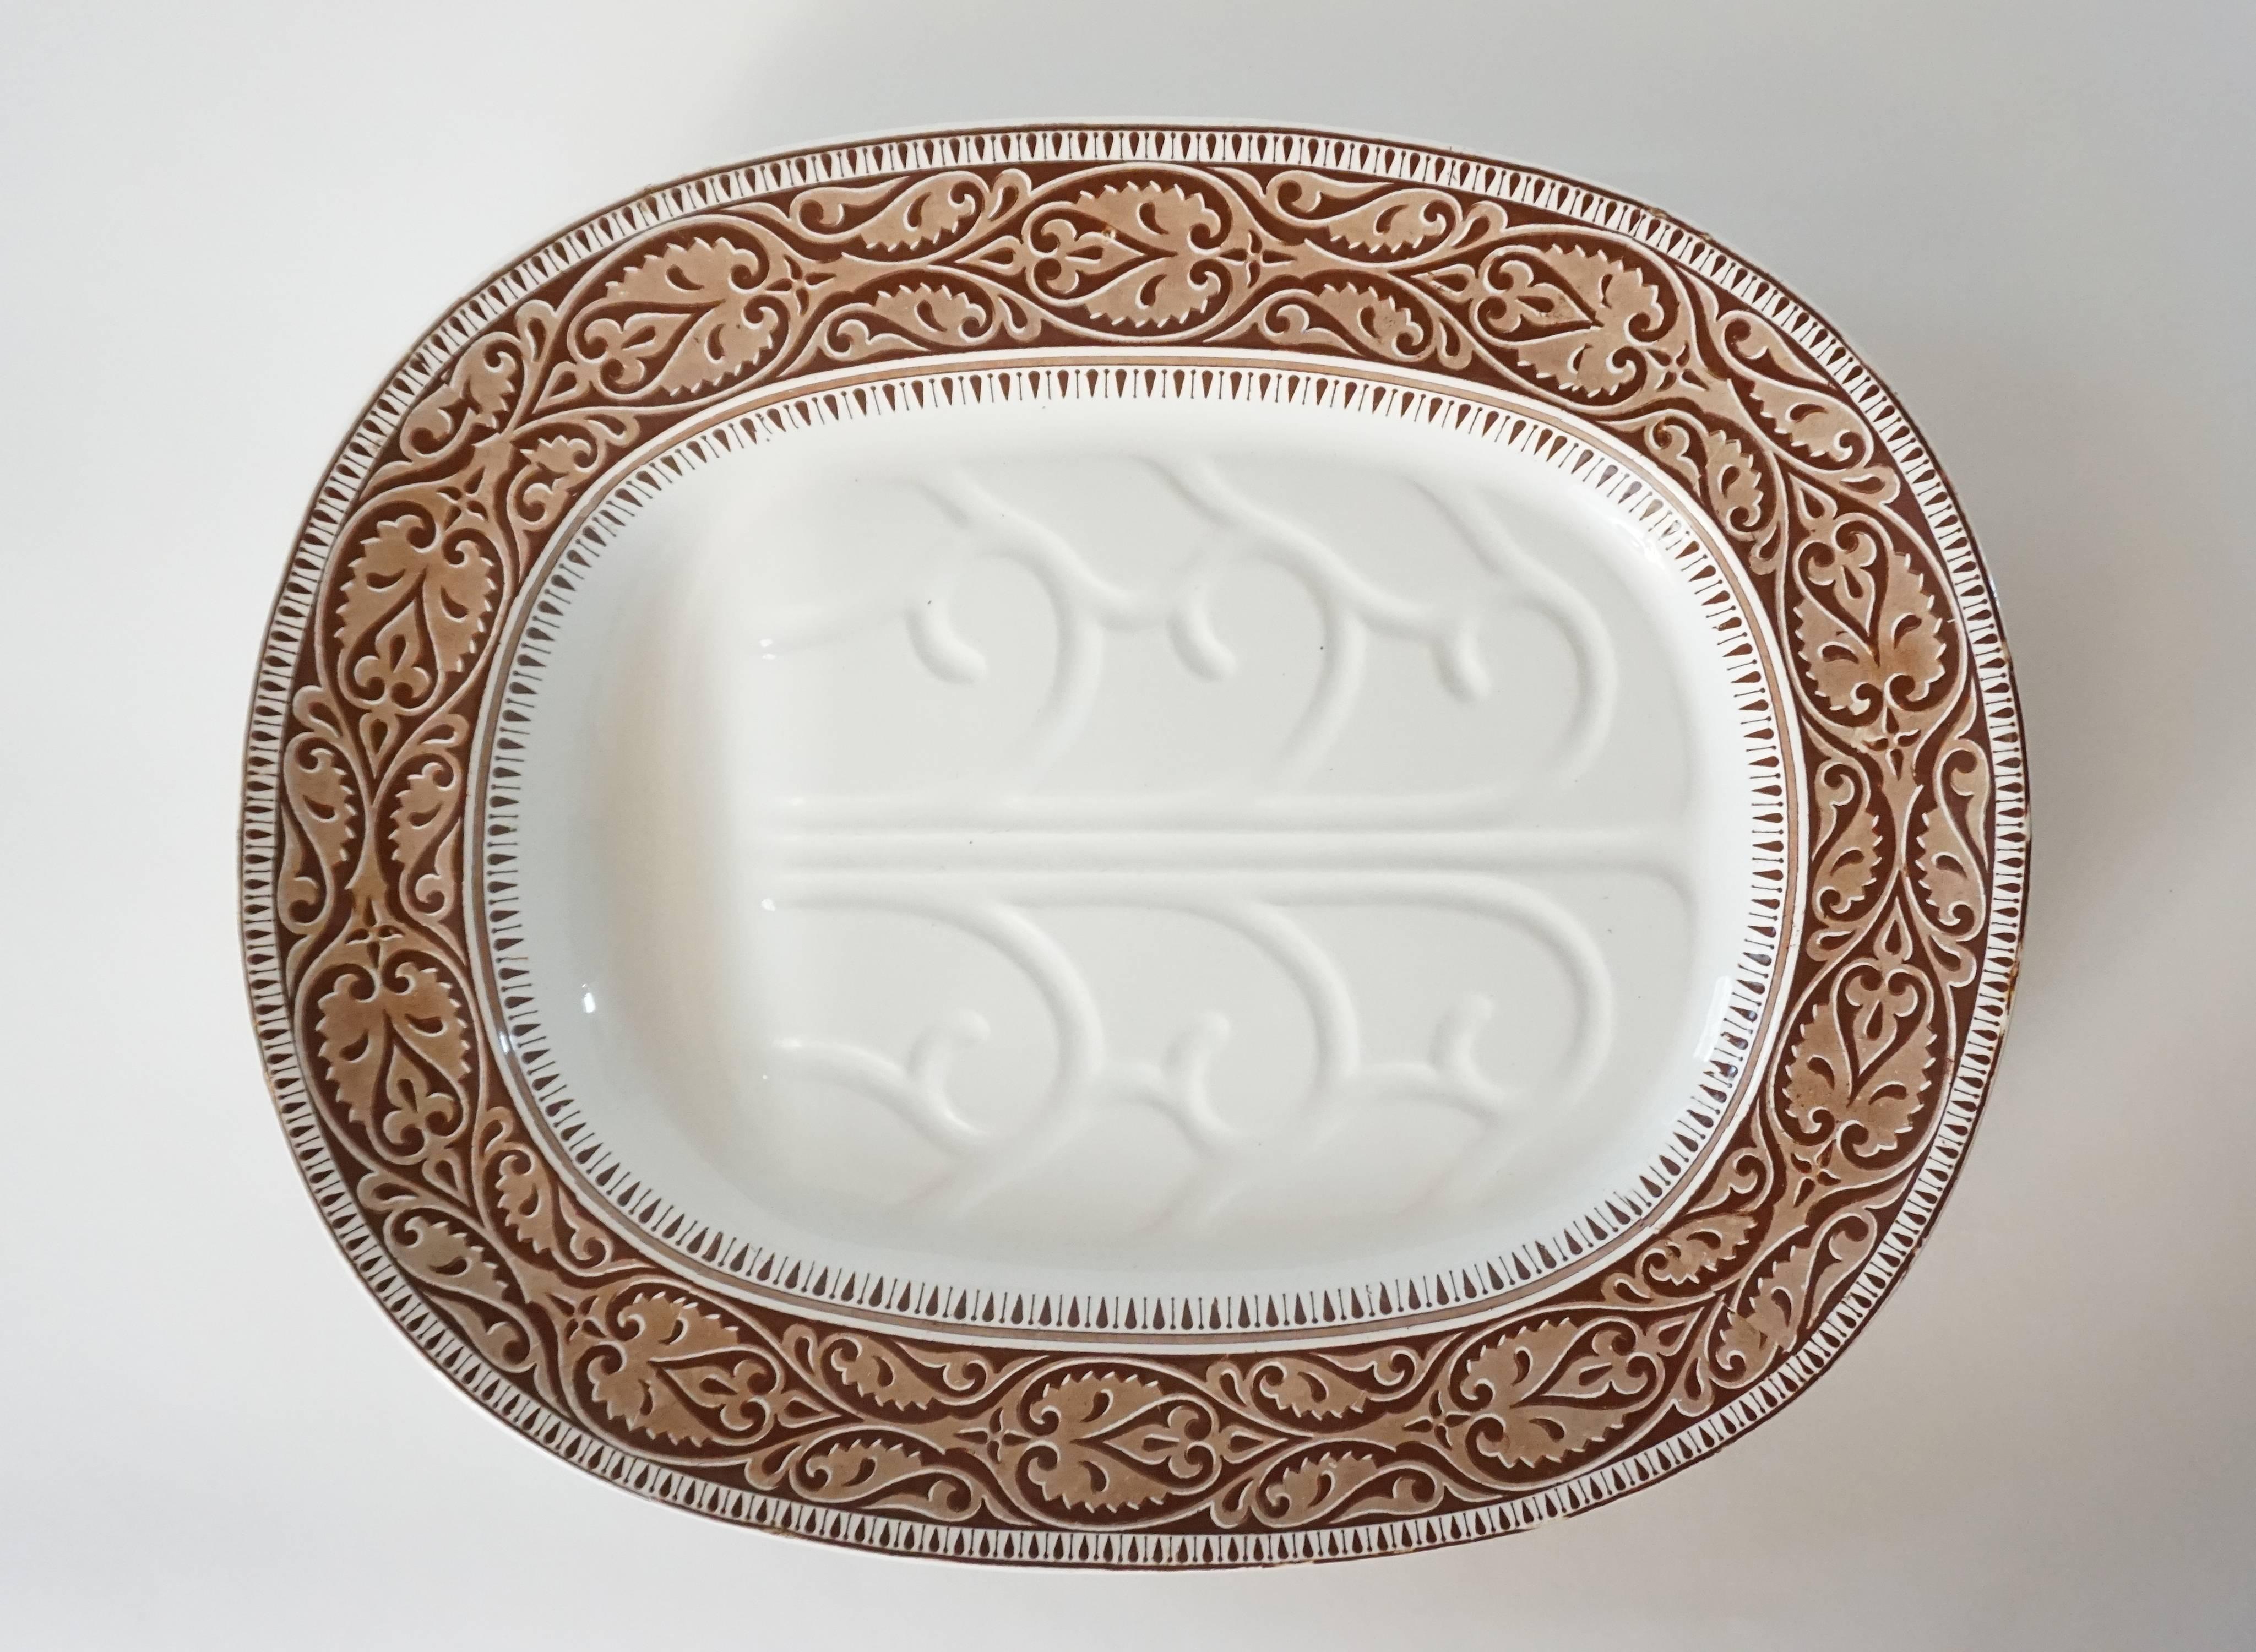 Large English Staffordshire 'well-and-tree' serving platter having brown transfer 'tracery' band border. Reverse marked with 'Copeland Late Spode', British registry marks translating to production on October 14th, 1859, and impressed crown and